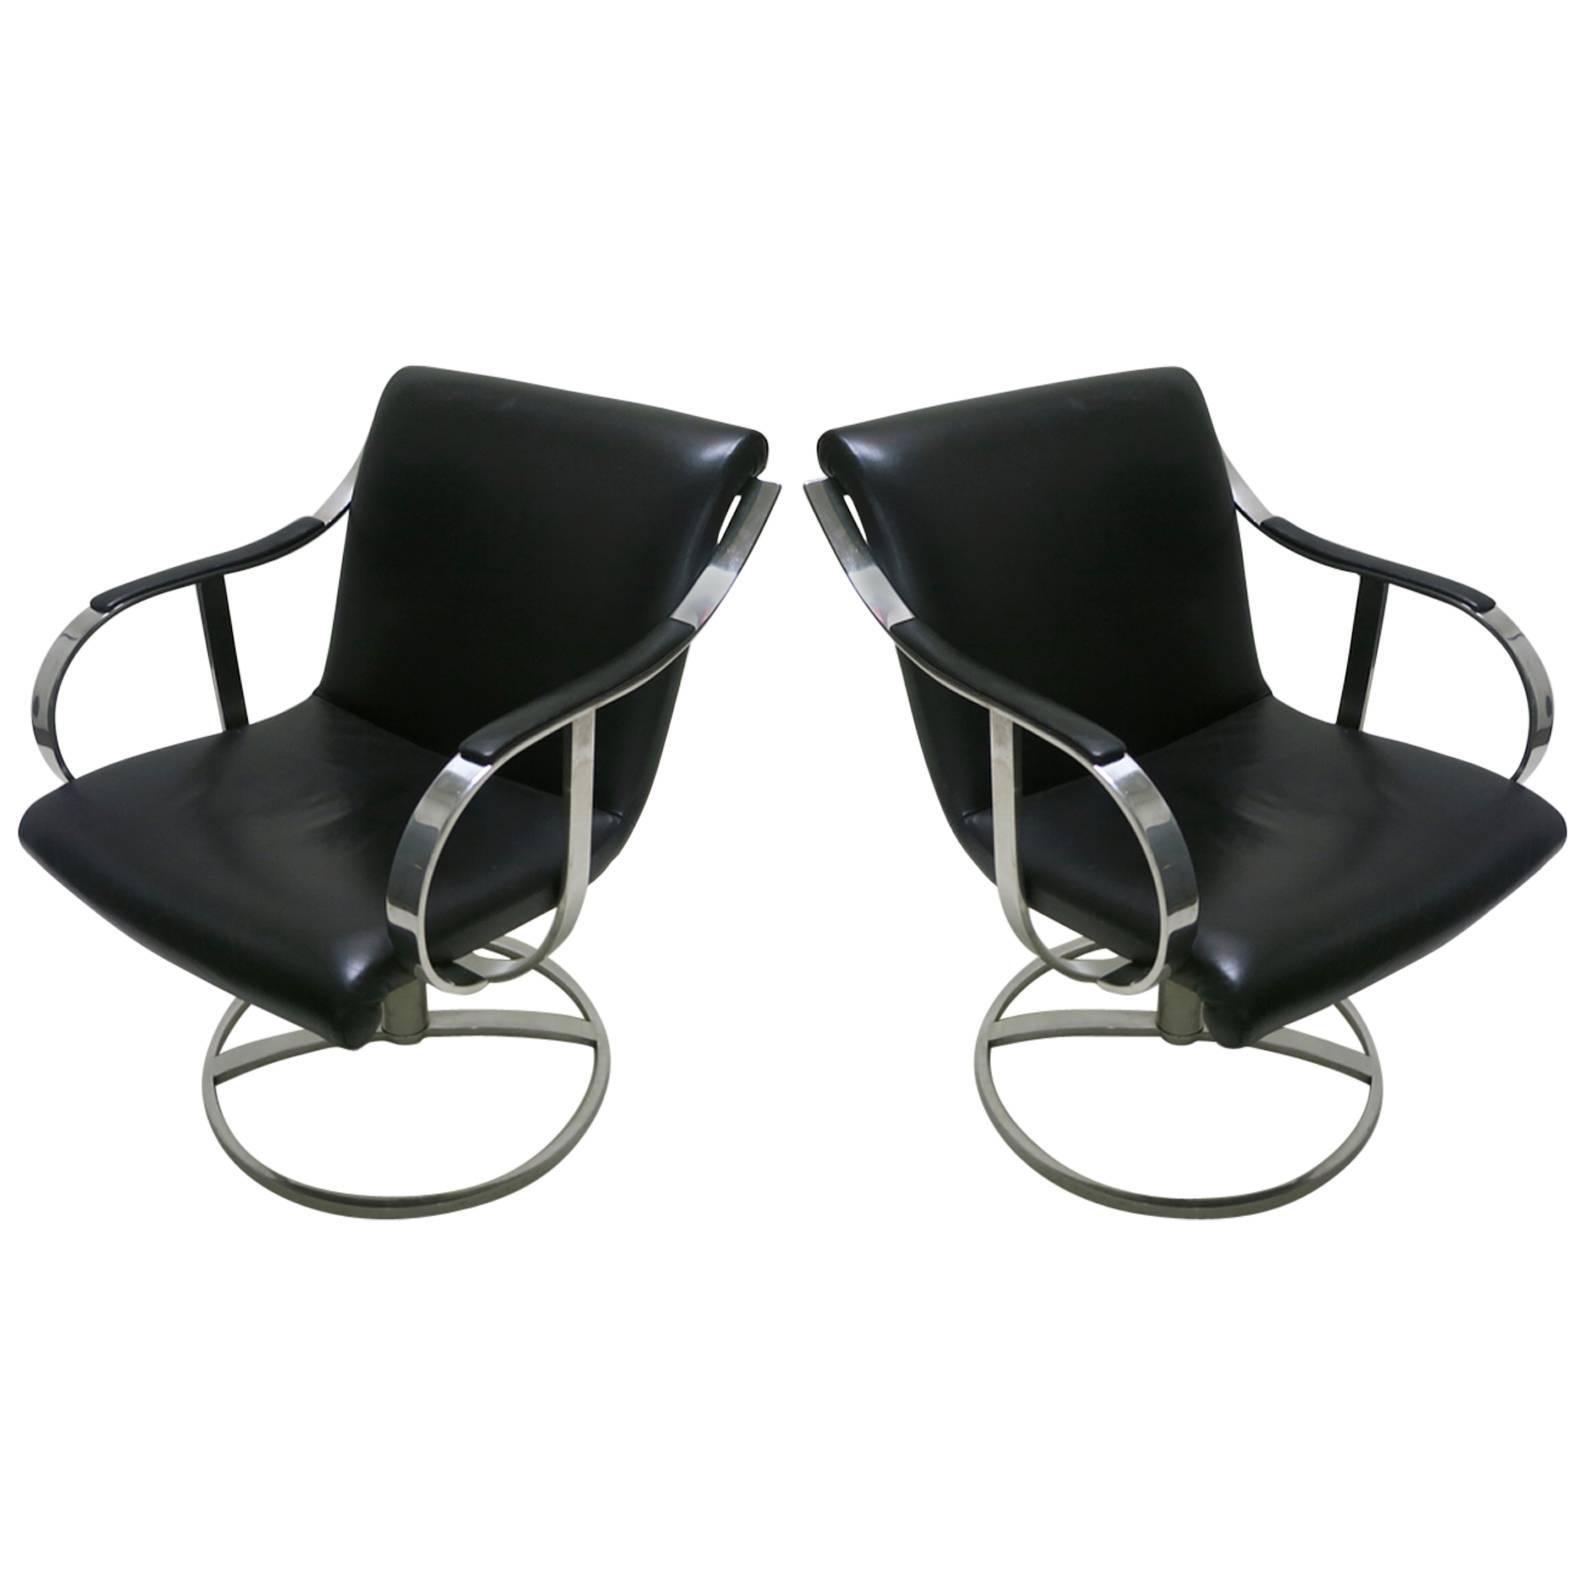 Pair of Swivel Chairs by Gardner Leaver for Steelcase, circa 1965, American